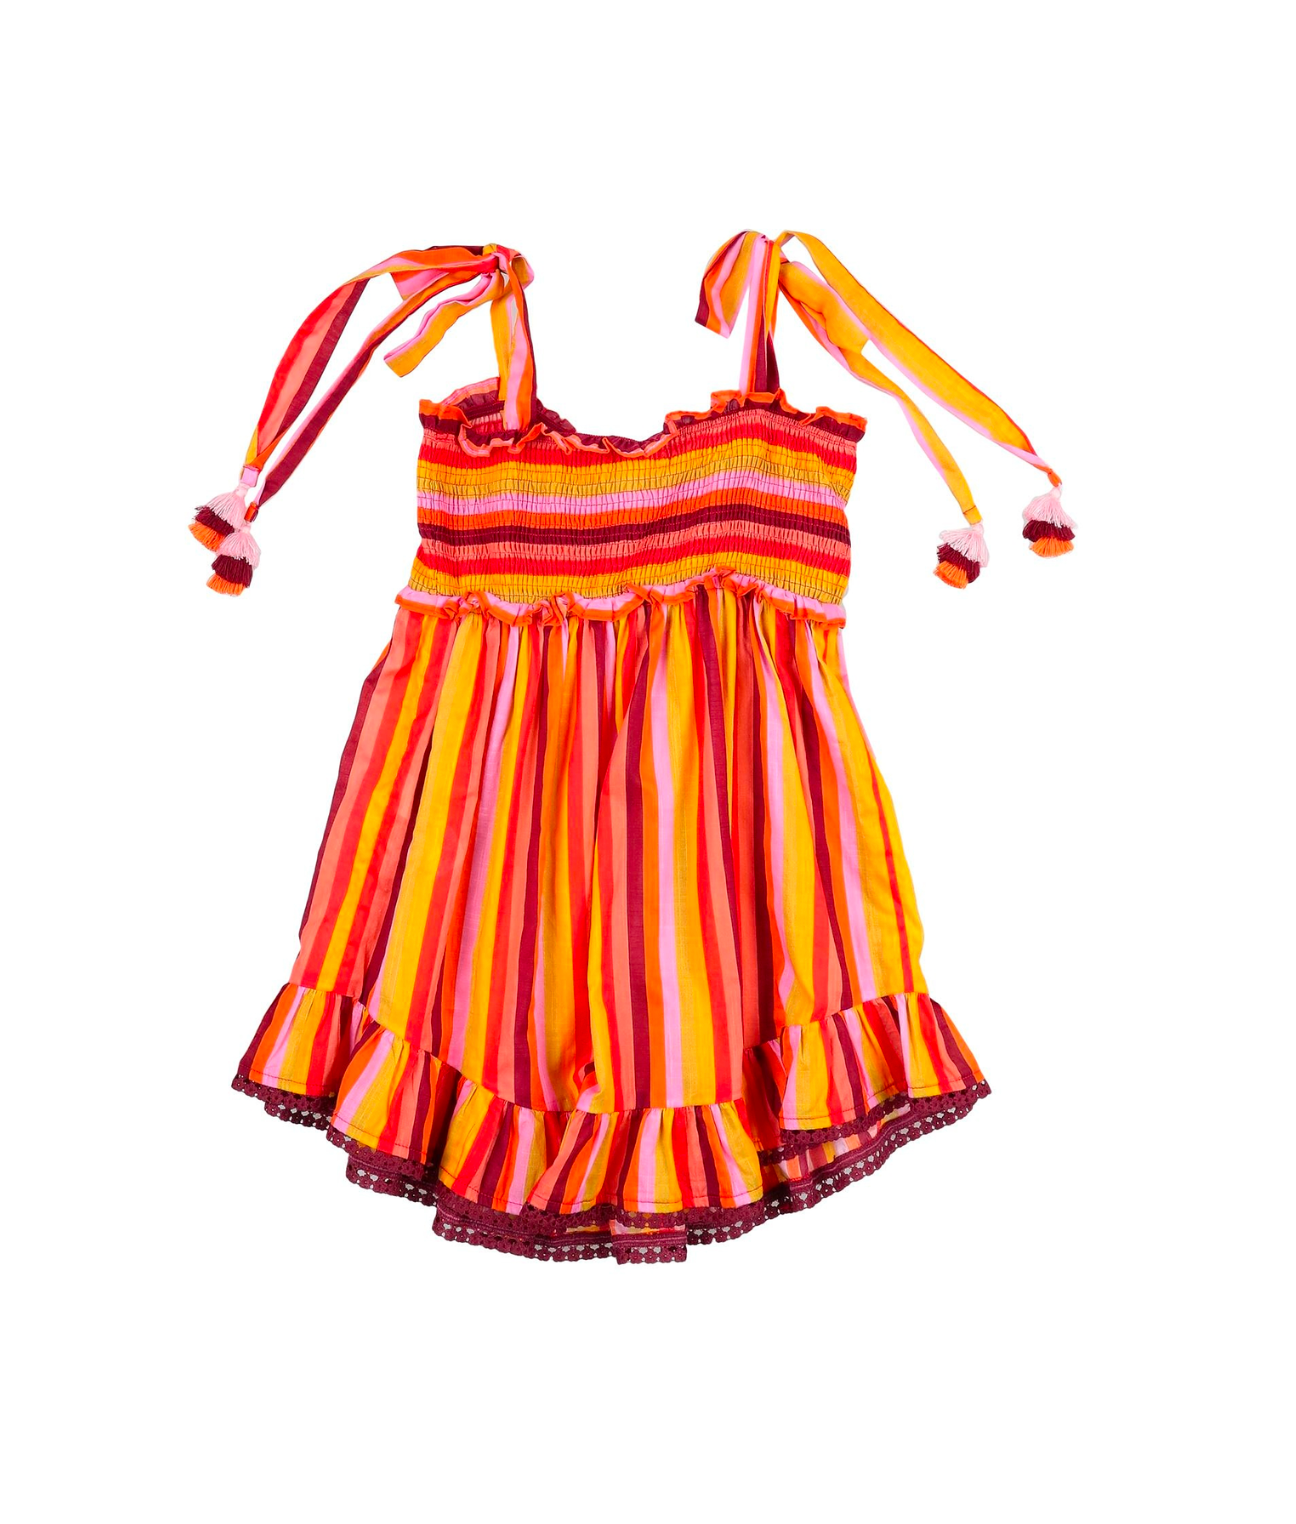 ZIMMERMANN - Multicolored dress - 10 years old